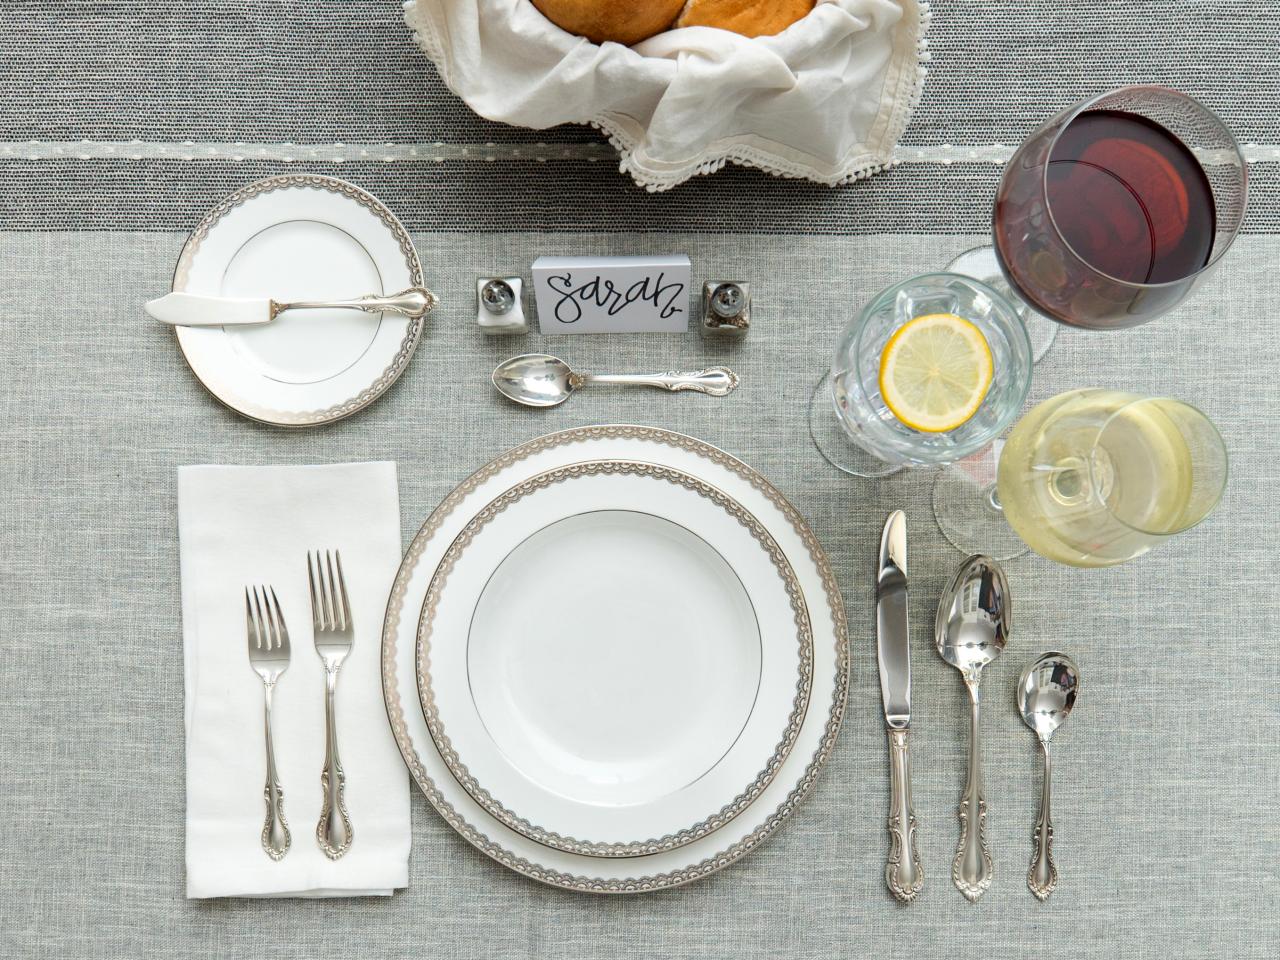 Which Component Of The Table Setting Includes Plates?